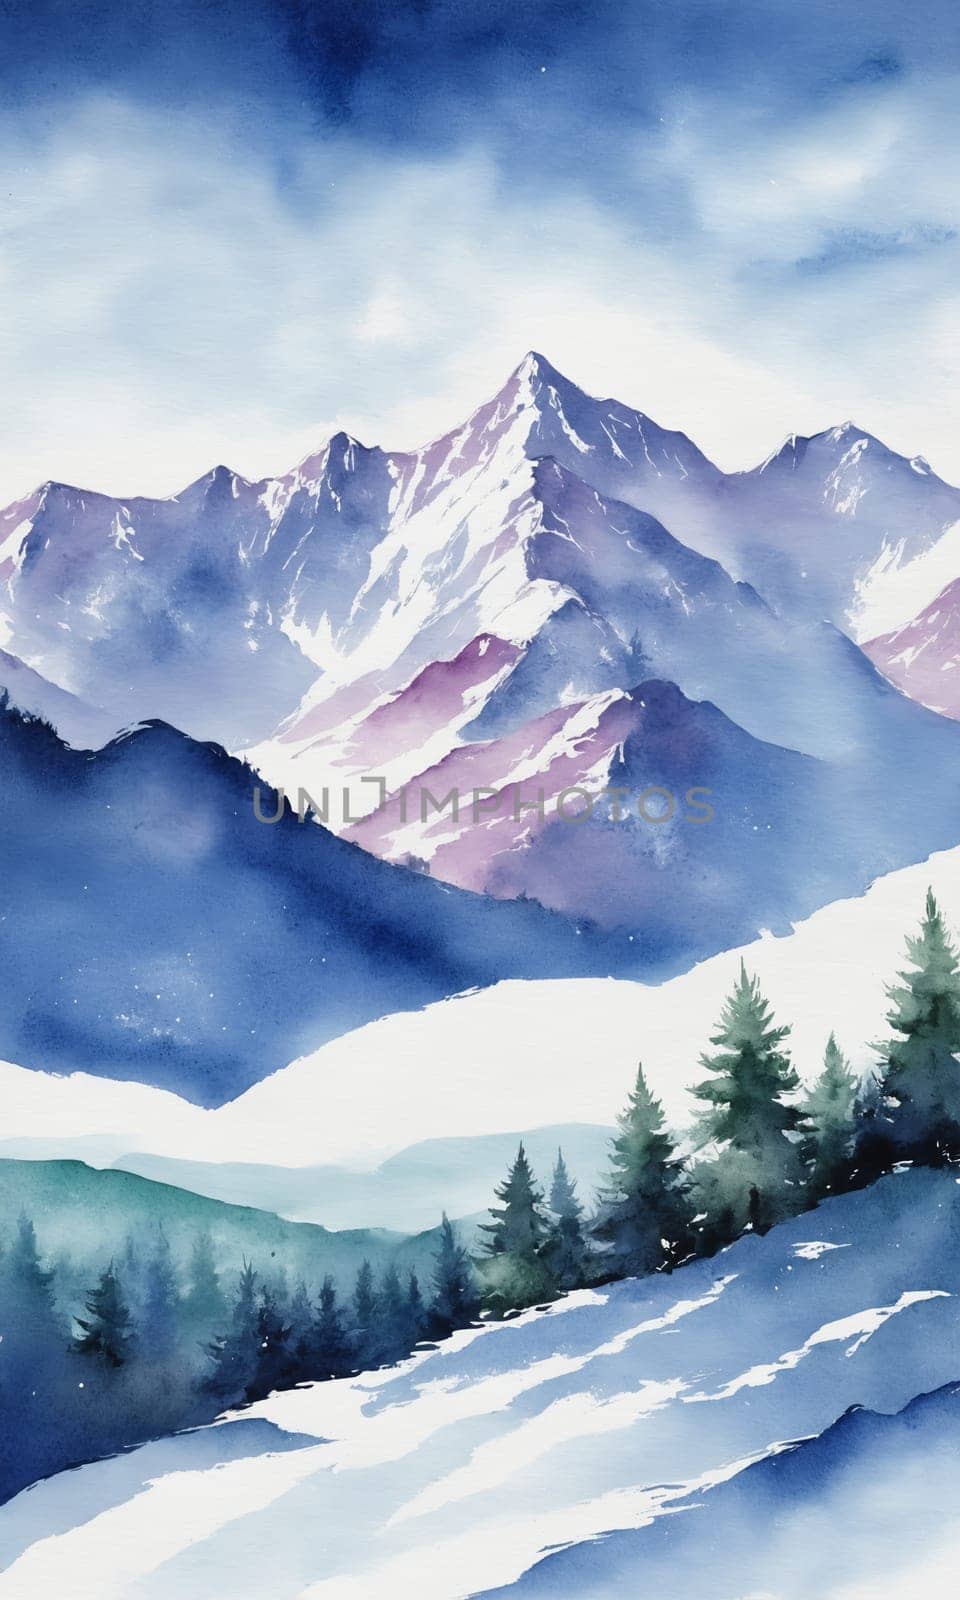 Watercolor winter landscape with mountains, pine trees and blue sky. by Andre1ns